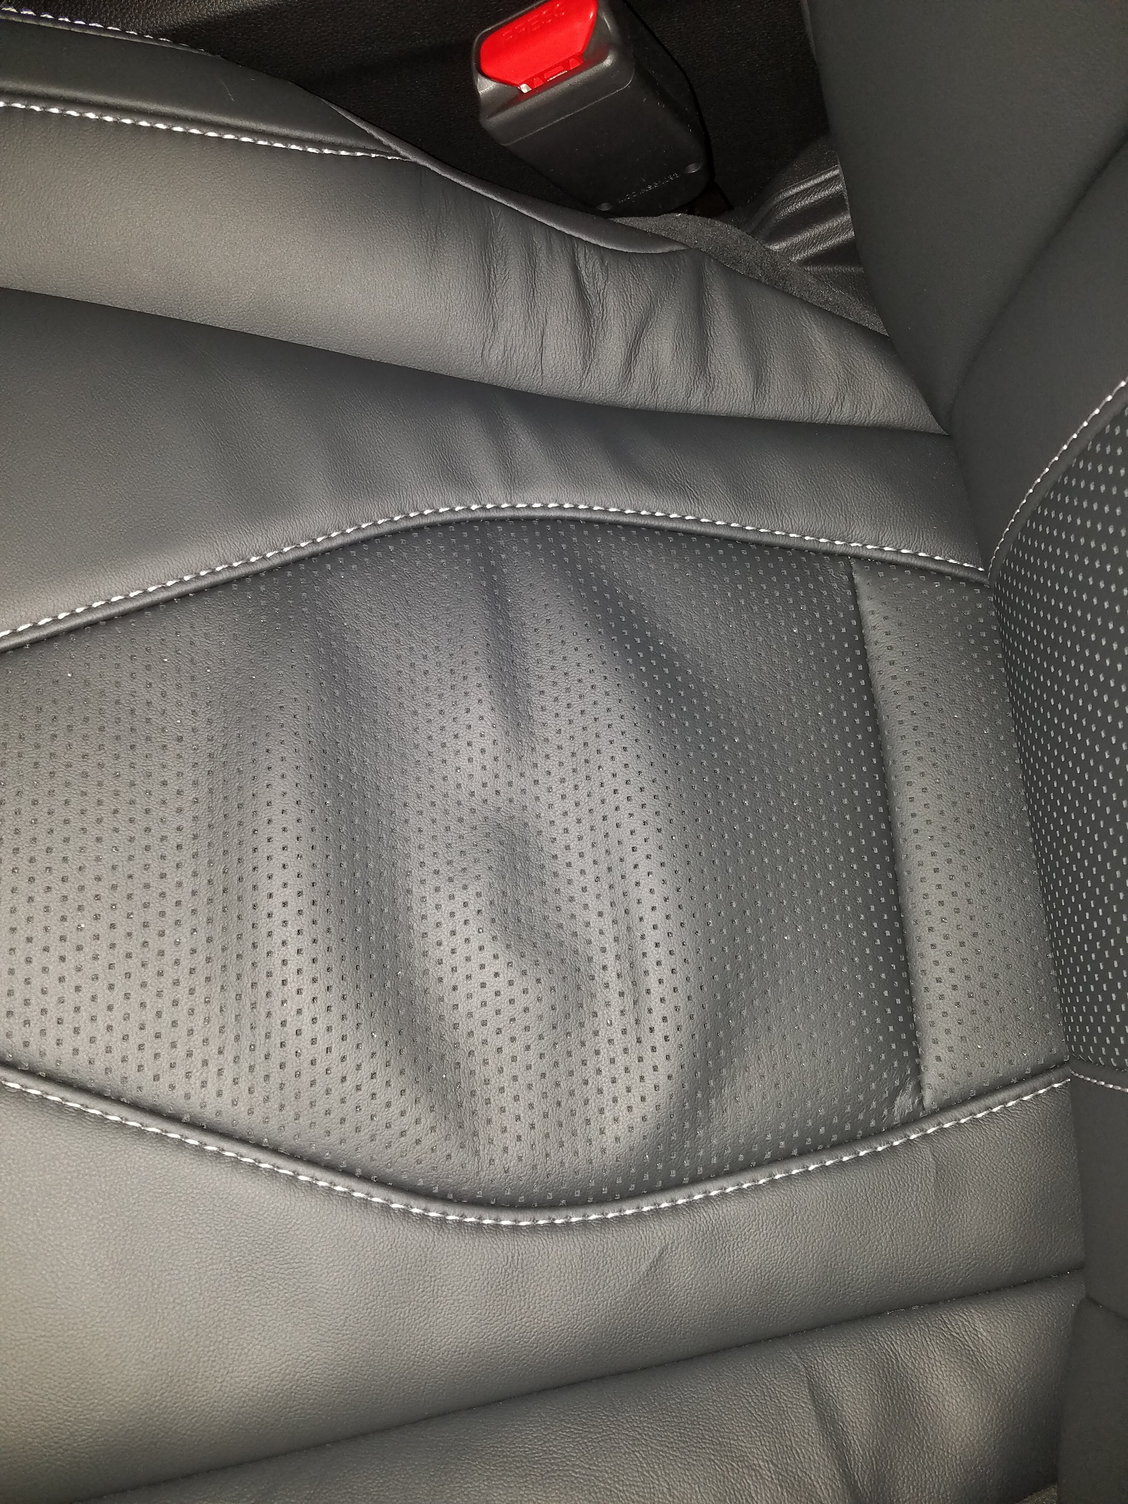 Front seats are loose/saggy in the perforated area - AcuraZine - Acura ...